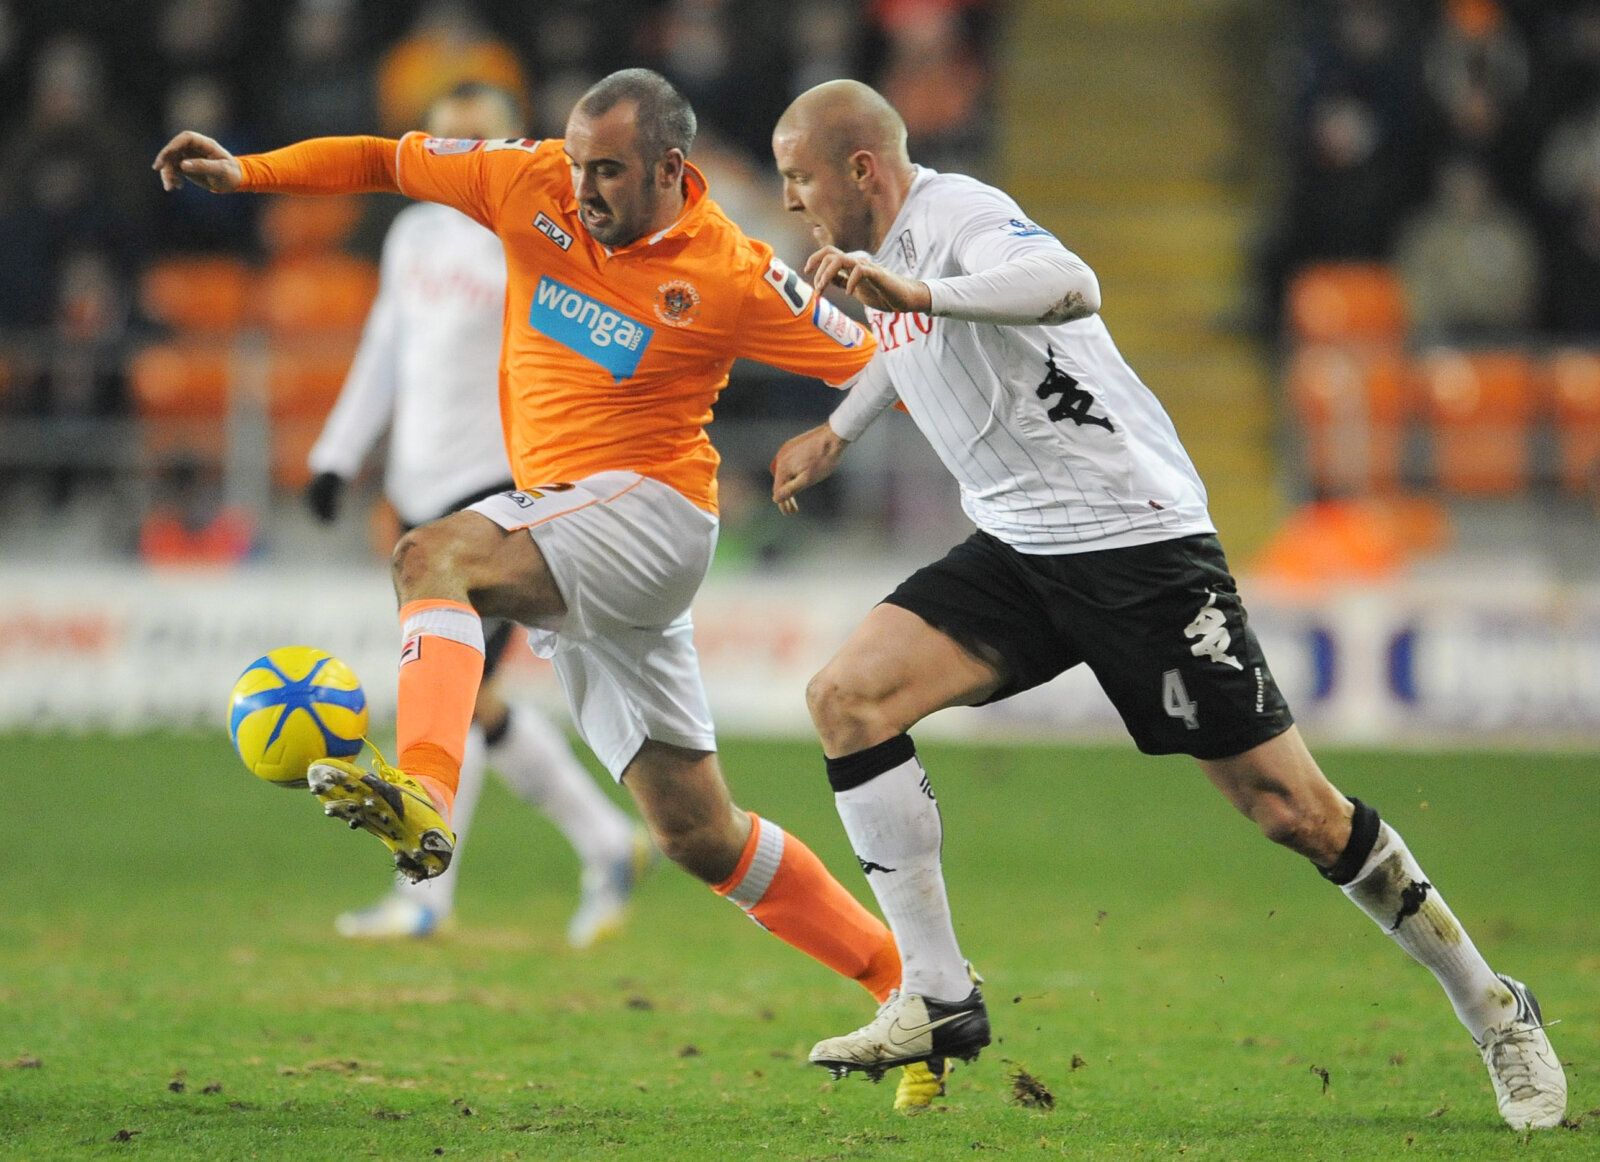 Football - Blackpool v Fulham - FA Cup Third Round Replay - Bloomfield Road - 15/1/13 
Blackpool's Gary Taylor Fletcher and Philippe Senderos of Fulham  
Mandatory Credit: Action Images / Paul Currie 
Livepic